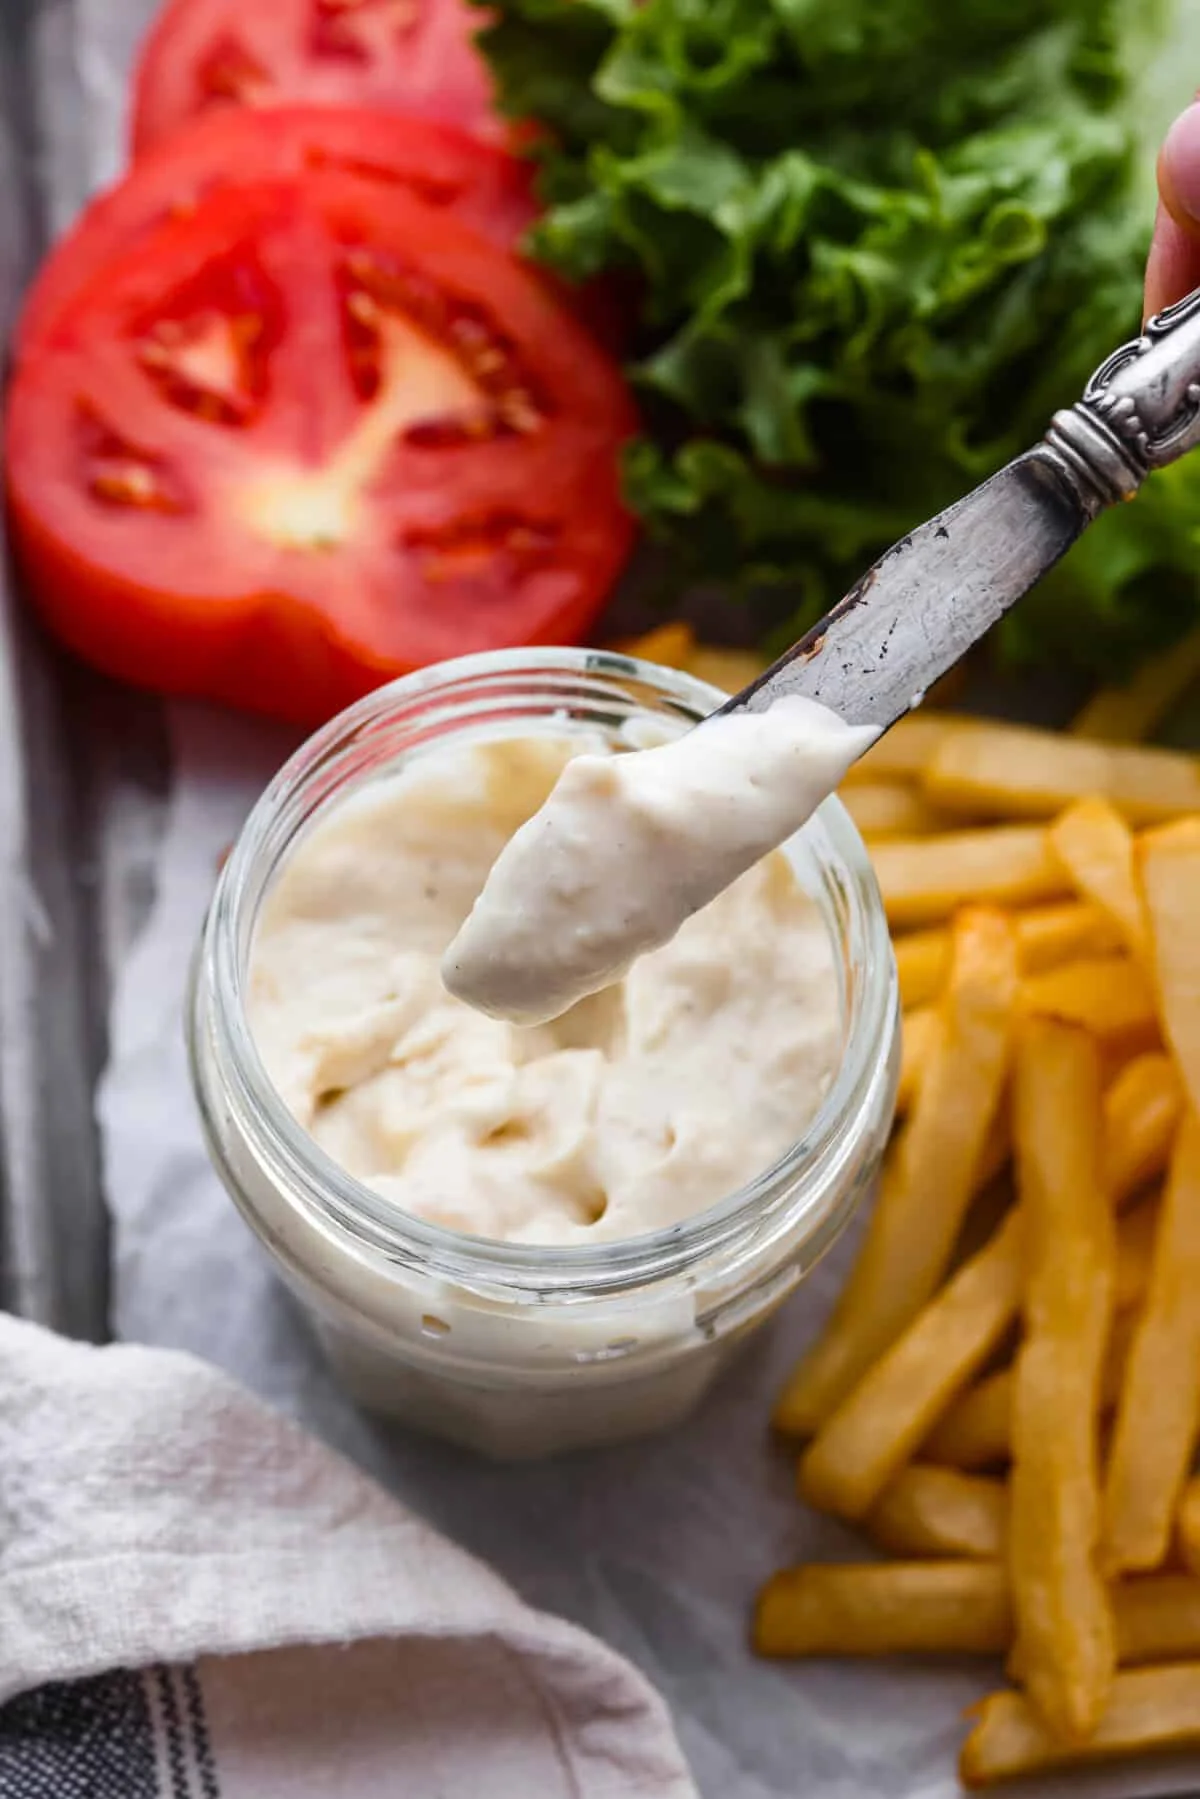 Close top view of a knife lifting donkey sauce from the jar. Fries and burger ingredients are scattered around the jar.